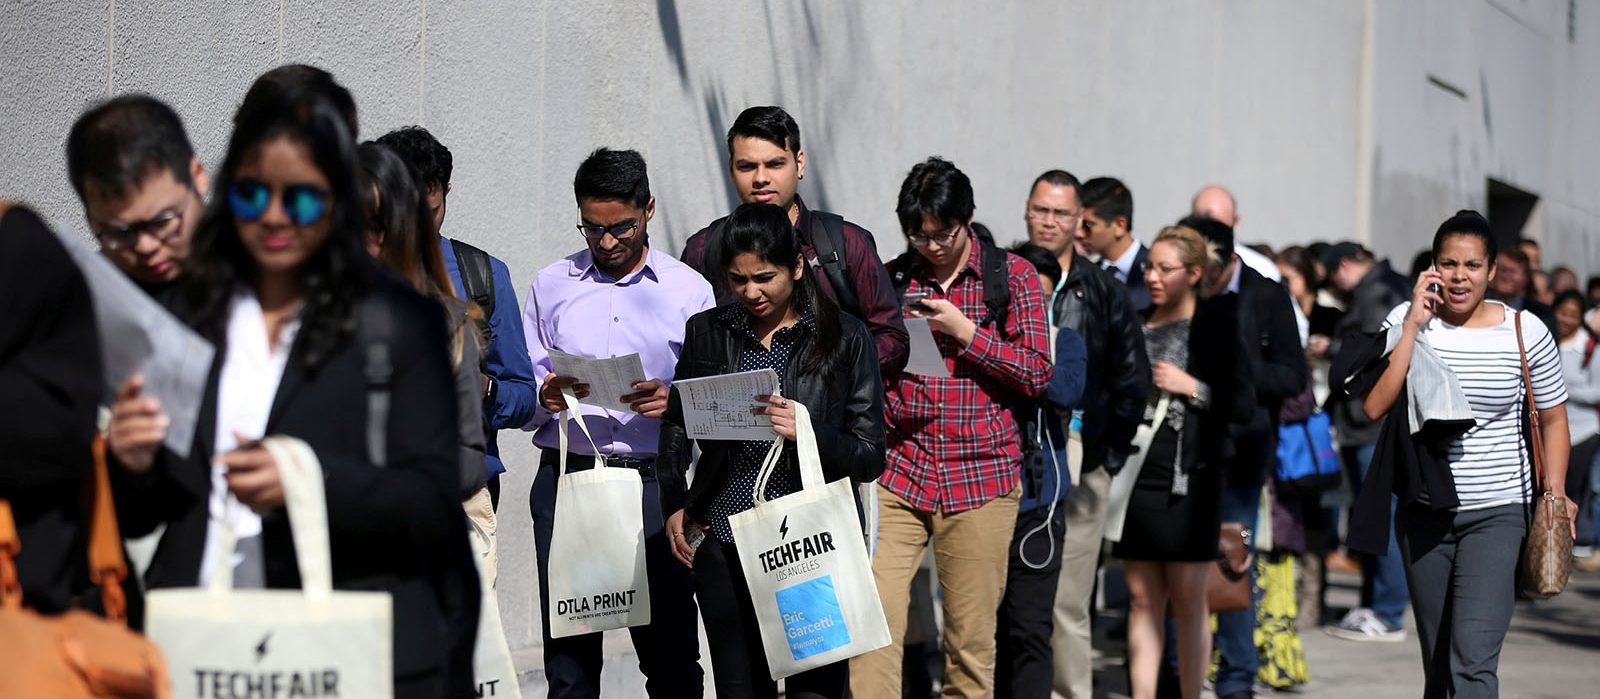 Job applicants wait in line at a technology job fair in Los Angeles. Photo: Reuters